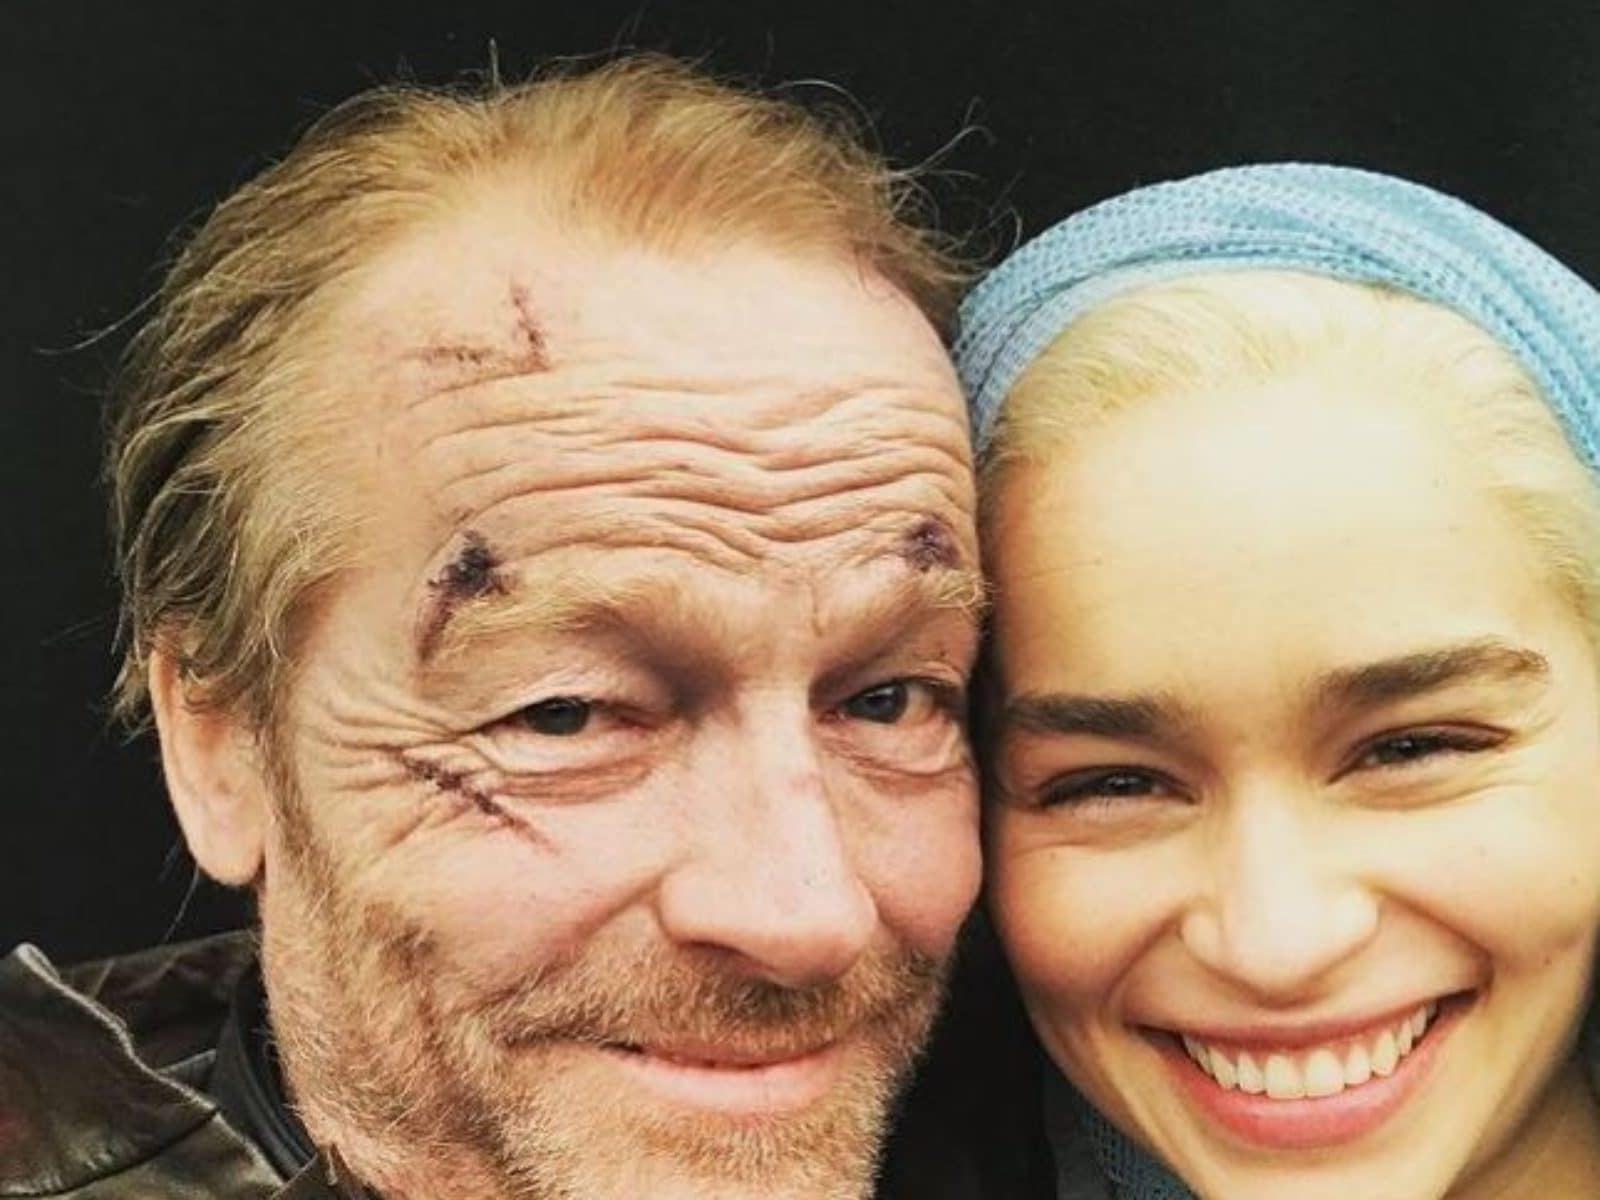 Emilia Clarke Welcomes Game Of Thrones Co-Star Iain Glen On Instagram With  Adorable Pics